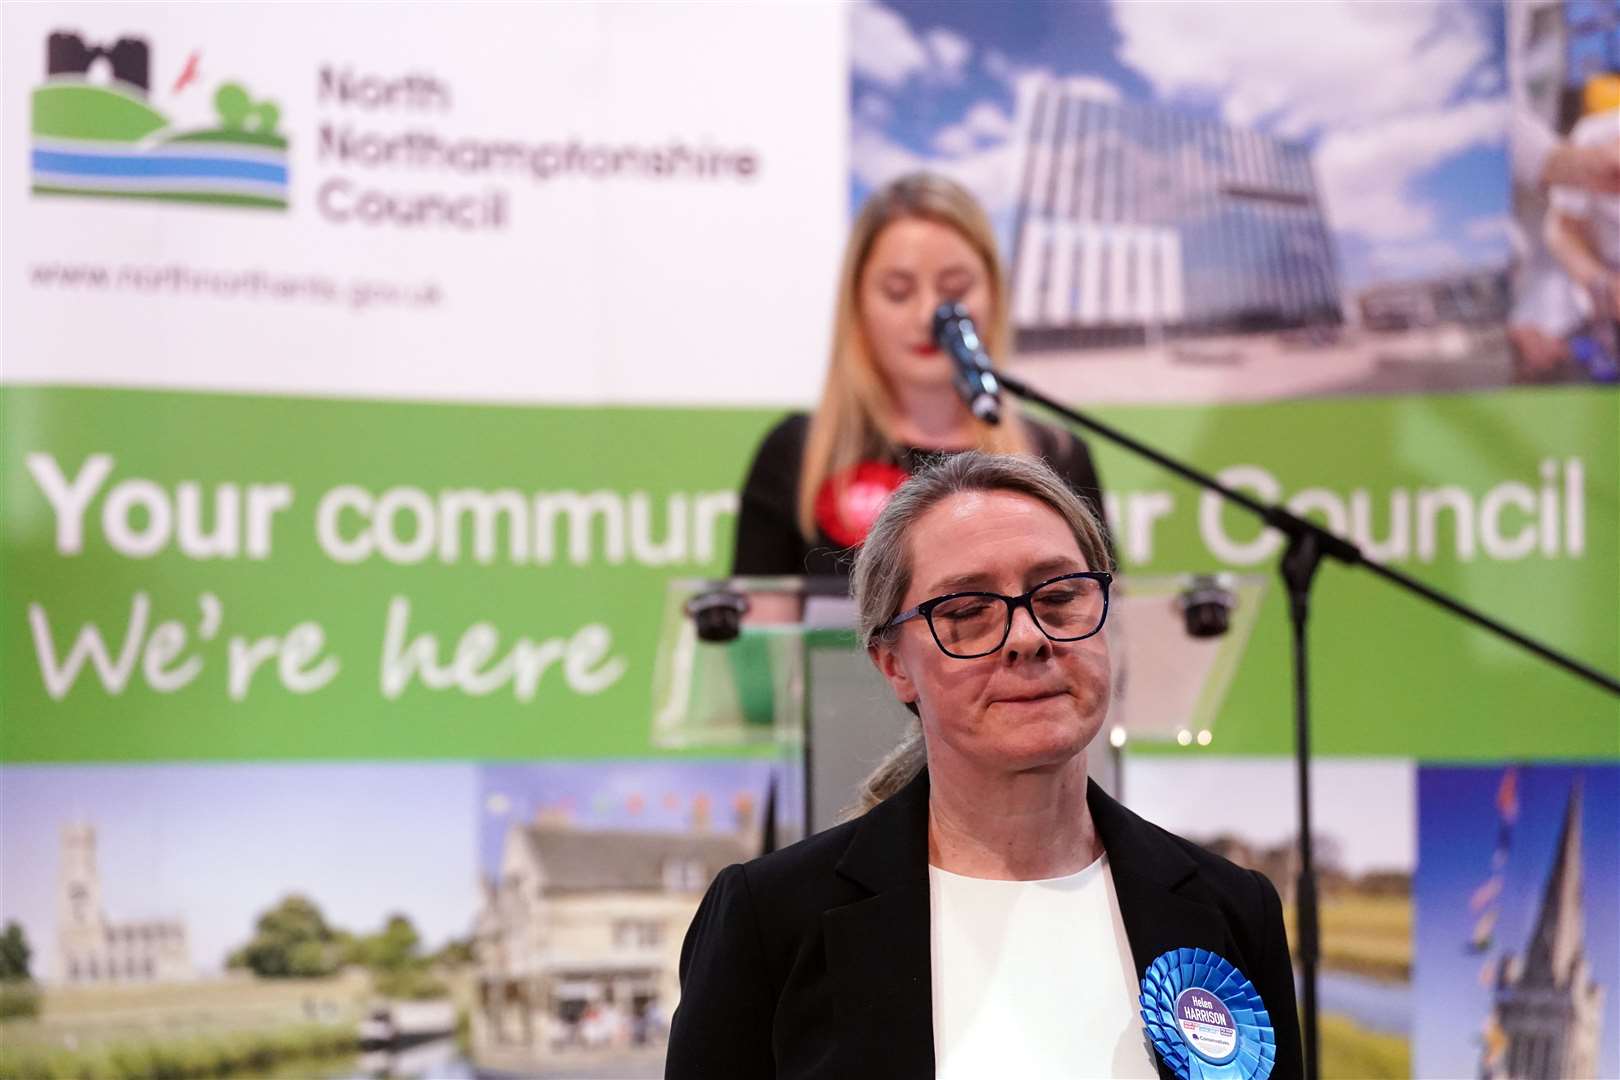 Wellingborough Conservative Party candidate Helen Harrison following the result announcement (Joe Giddens/PA)